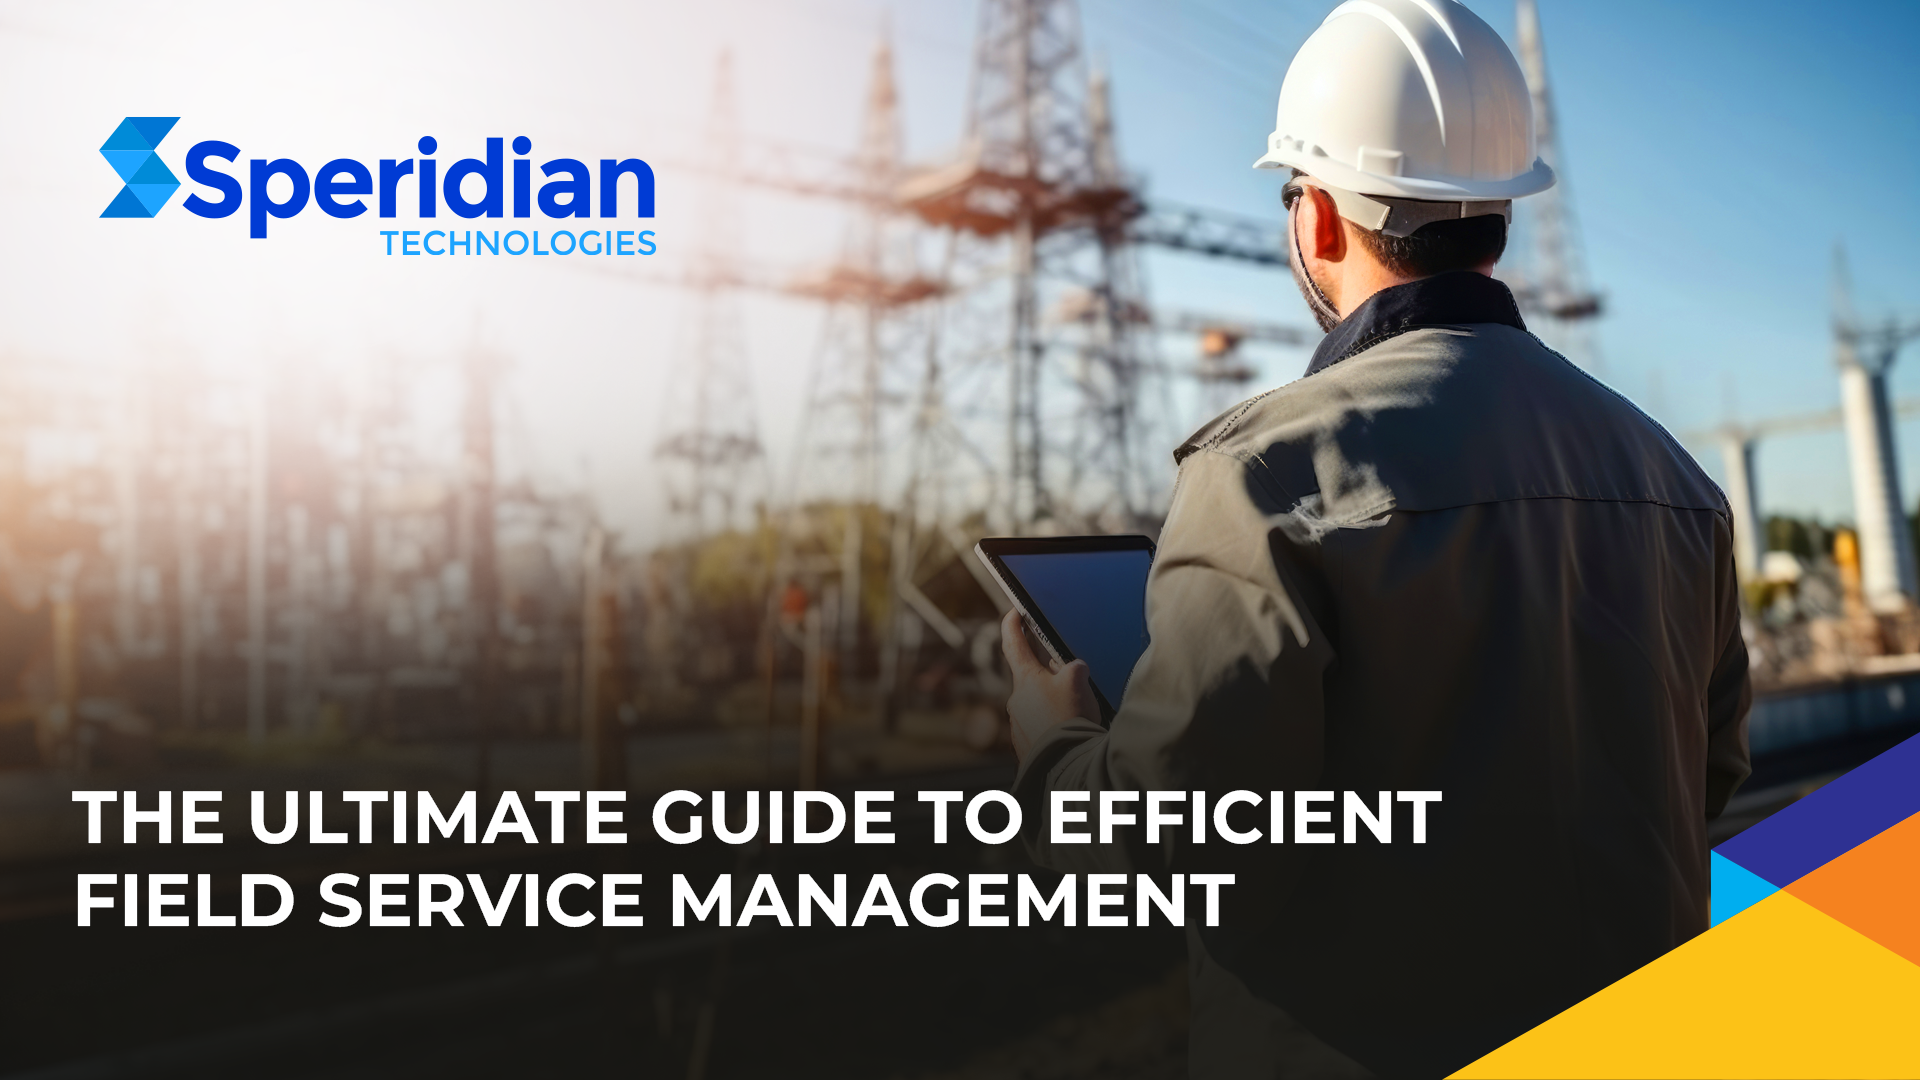 The ultimate guide to efficient Field Service Management